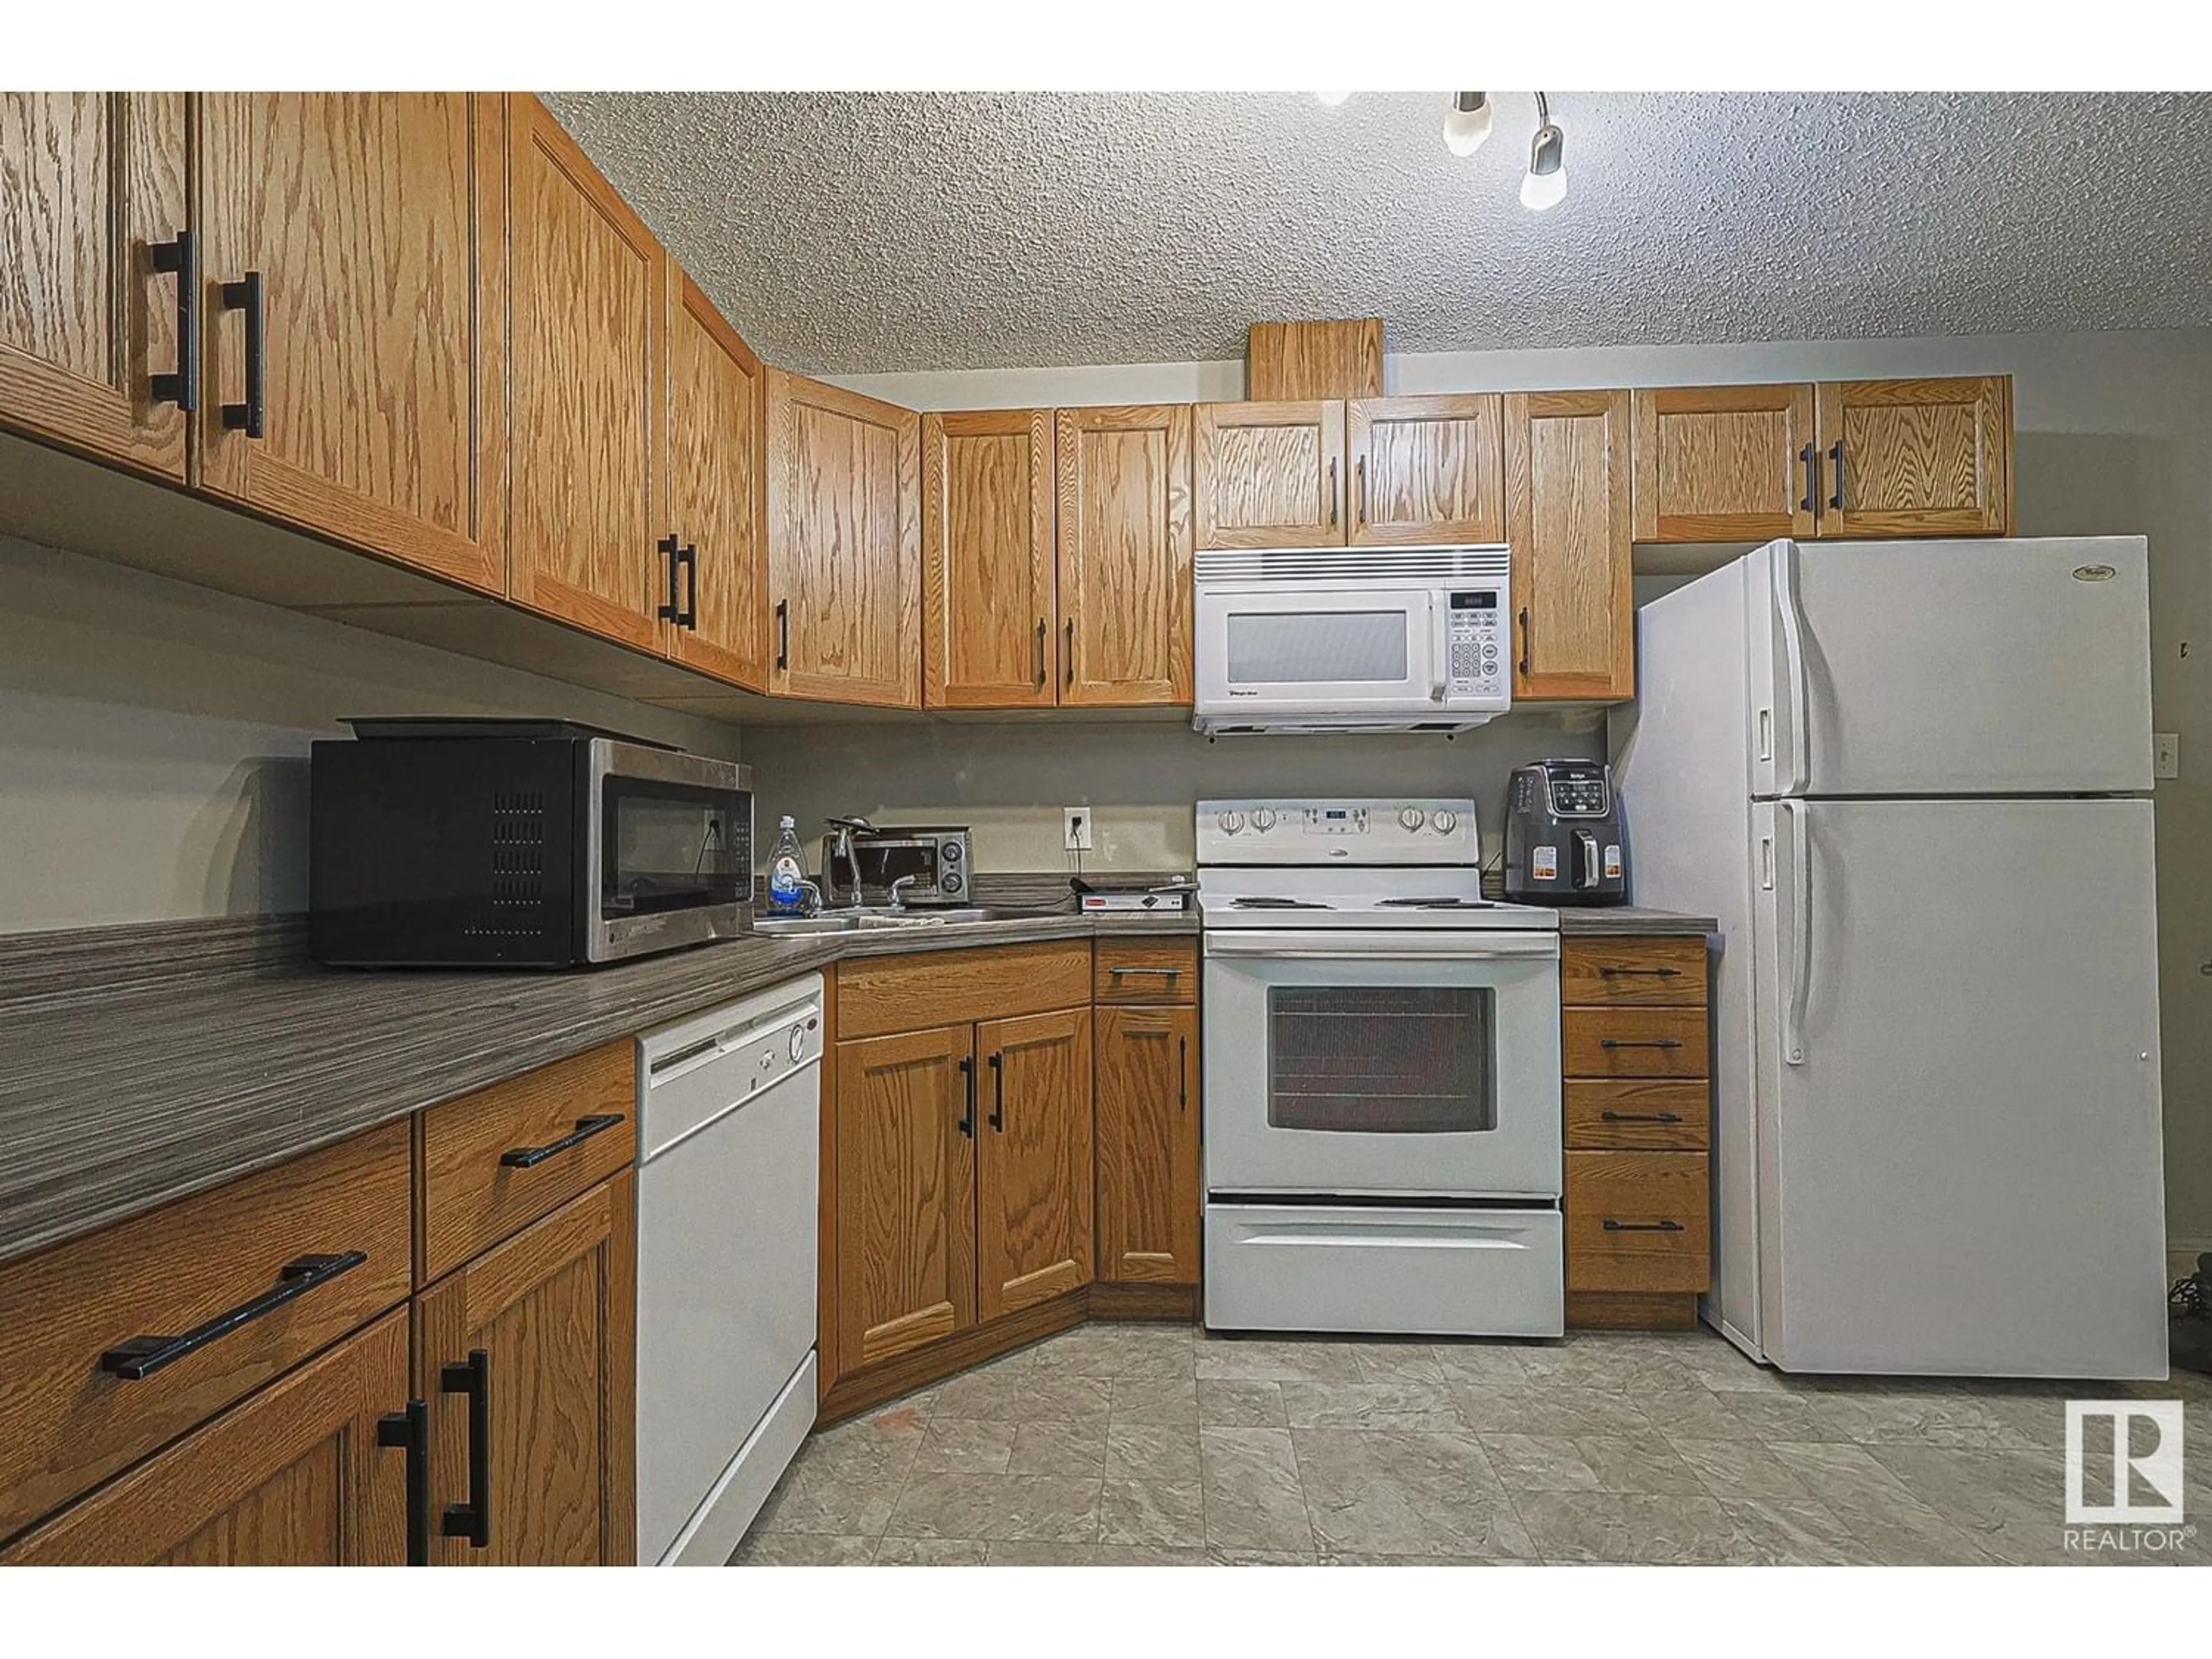 Standard kitchen for #119 309 CLAREVIEW STATION DR NW, Edmonton Alberta T5Y0C5